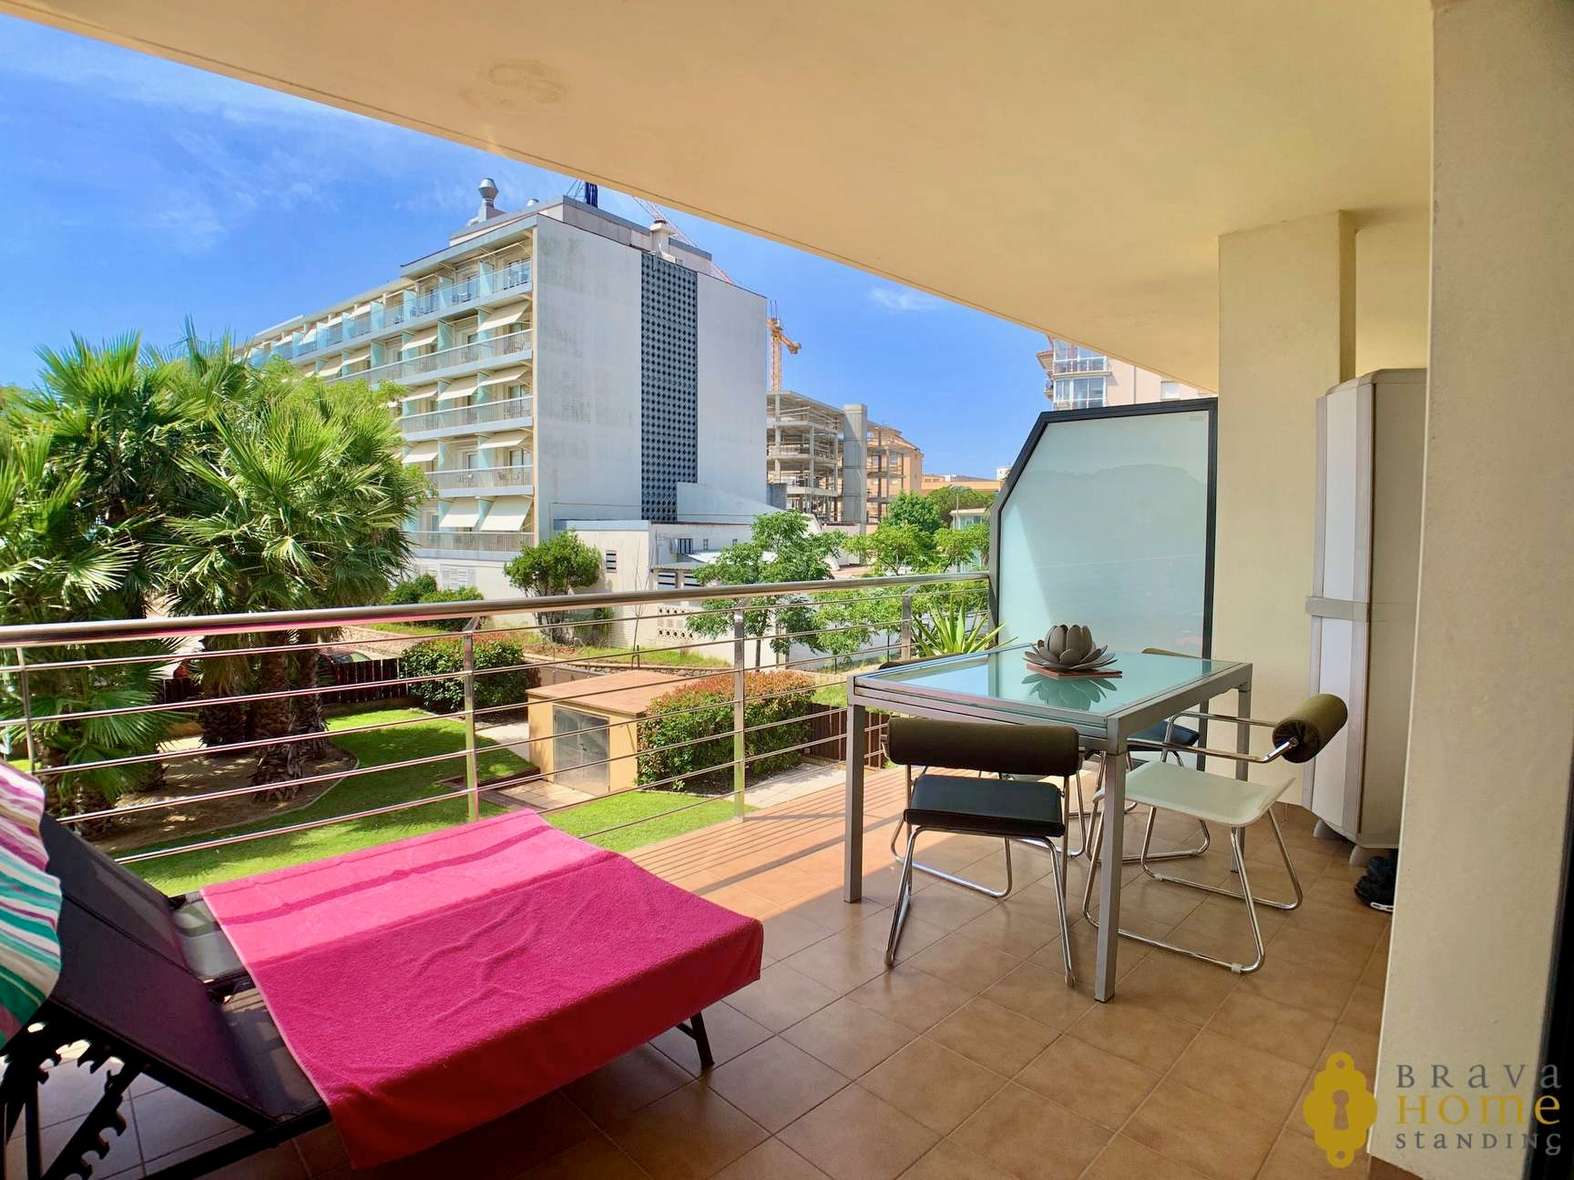 Splendid apartment in 1st line of the sea with pool for sale in Rosas - Salatar